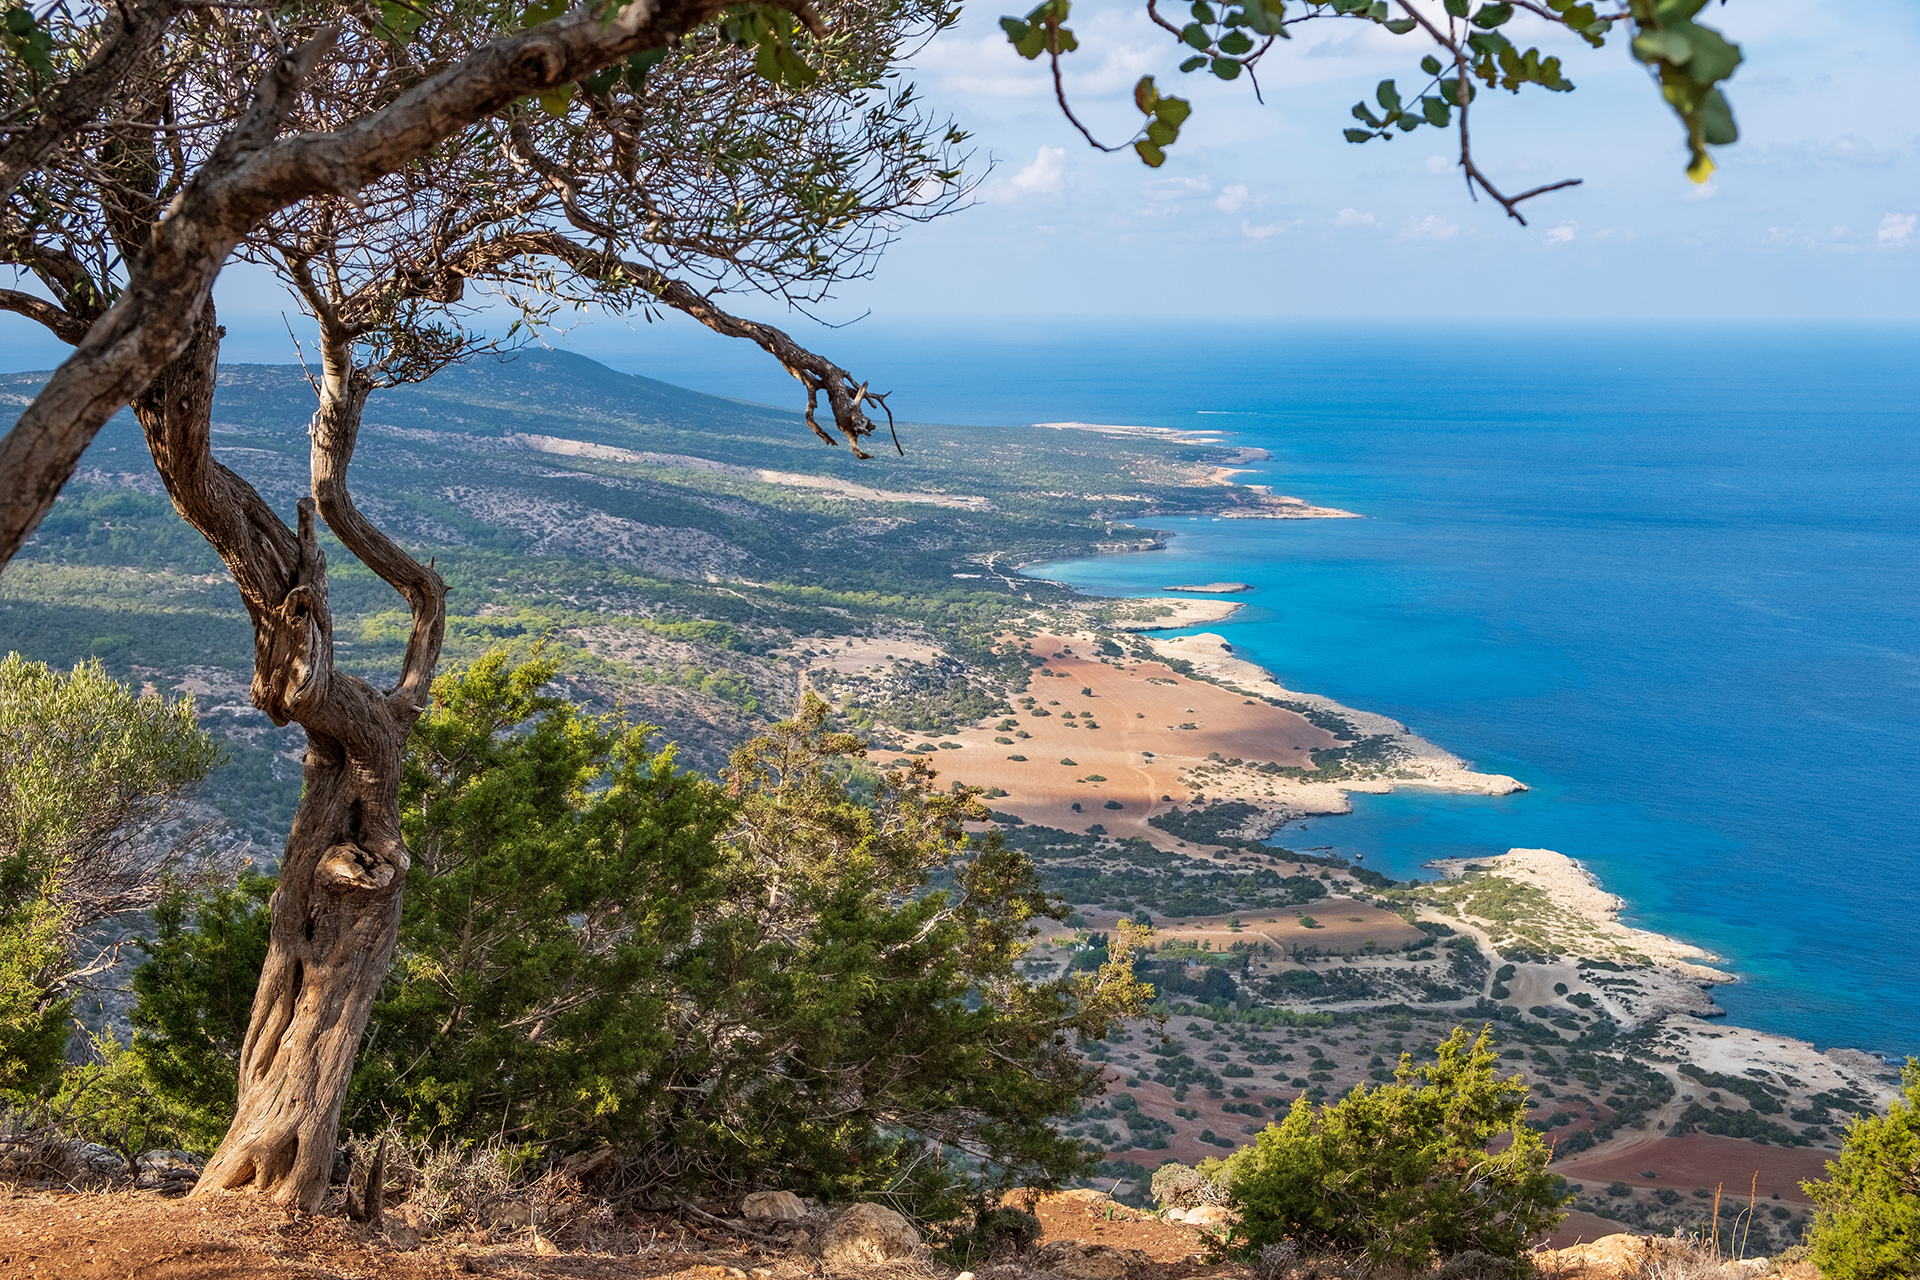 The best hiking trails in Cyprus